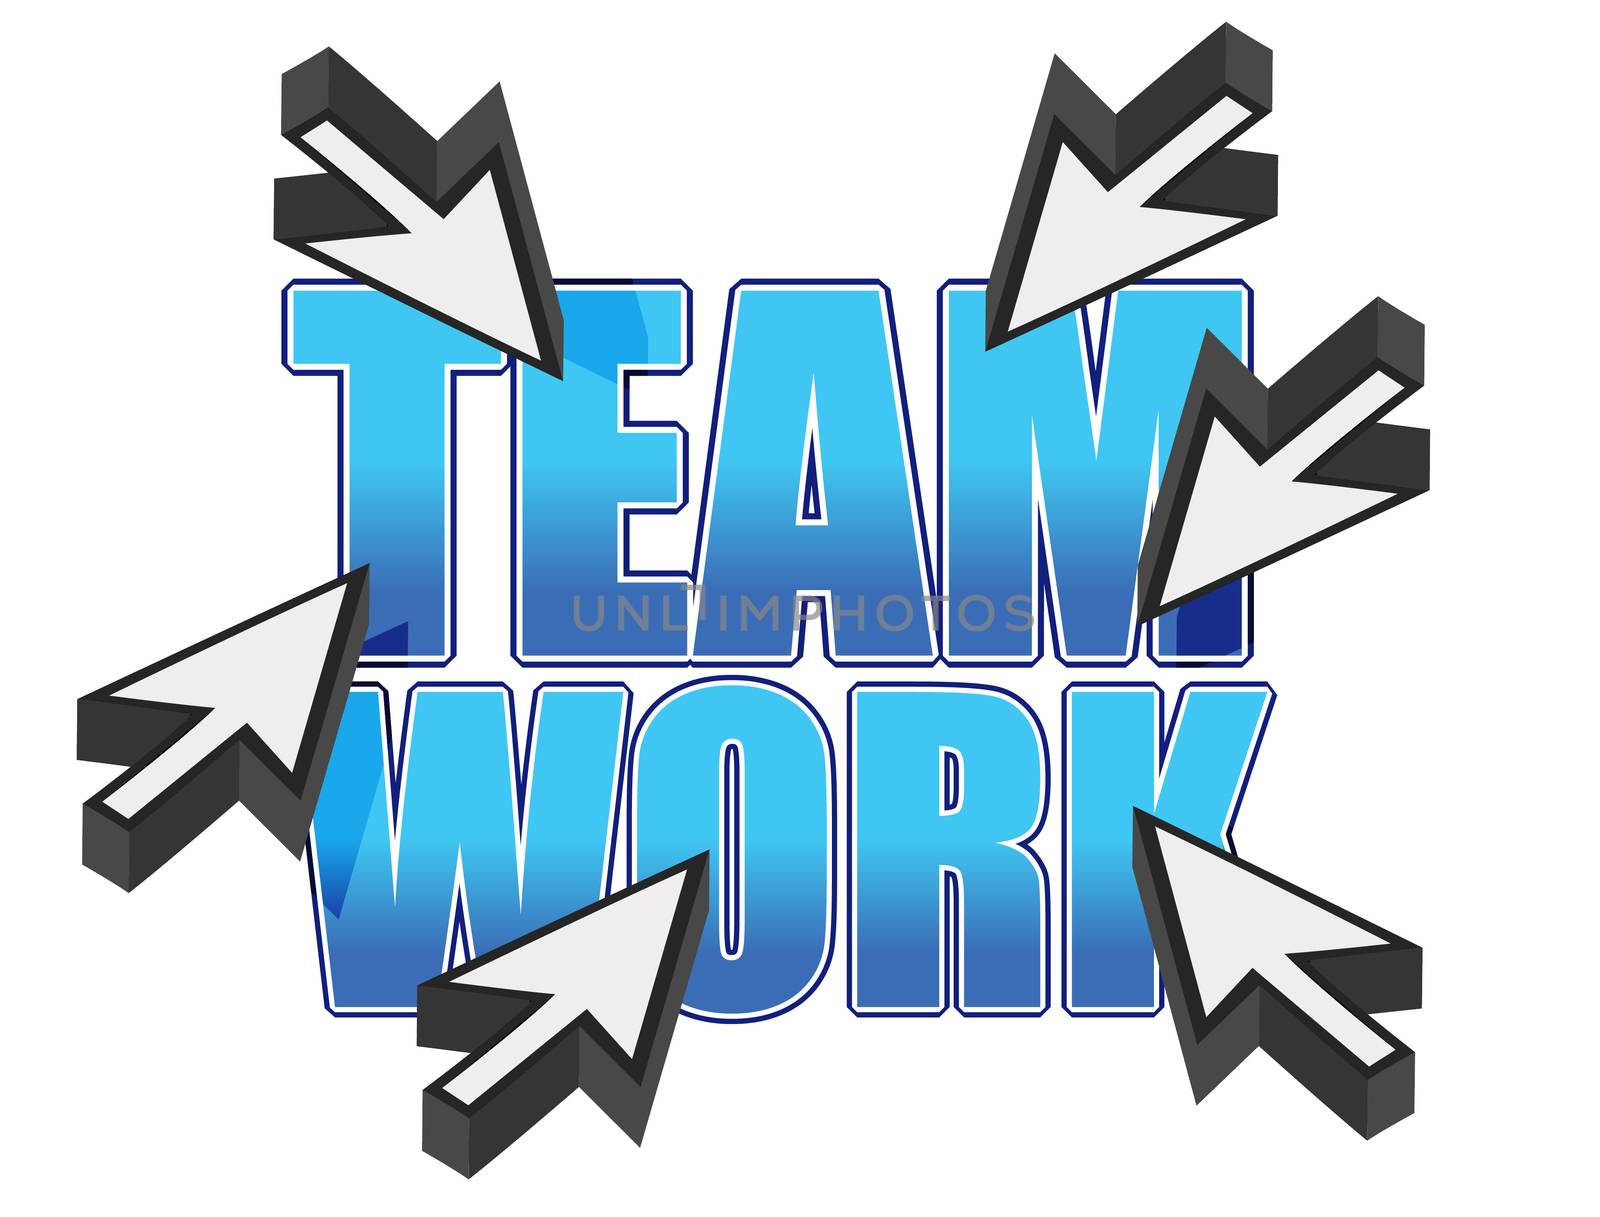 team work sign and mouse cursors over white